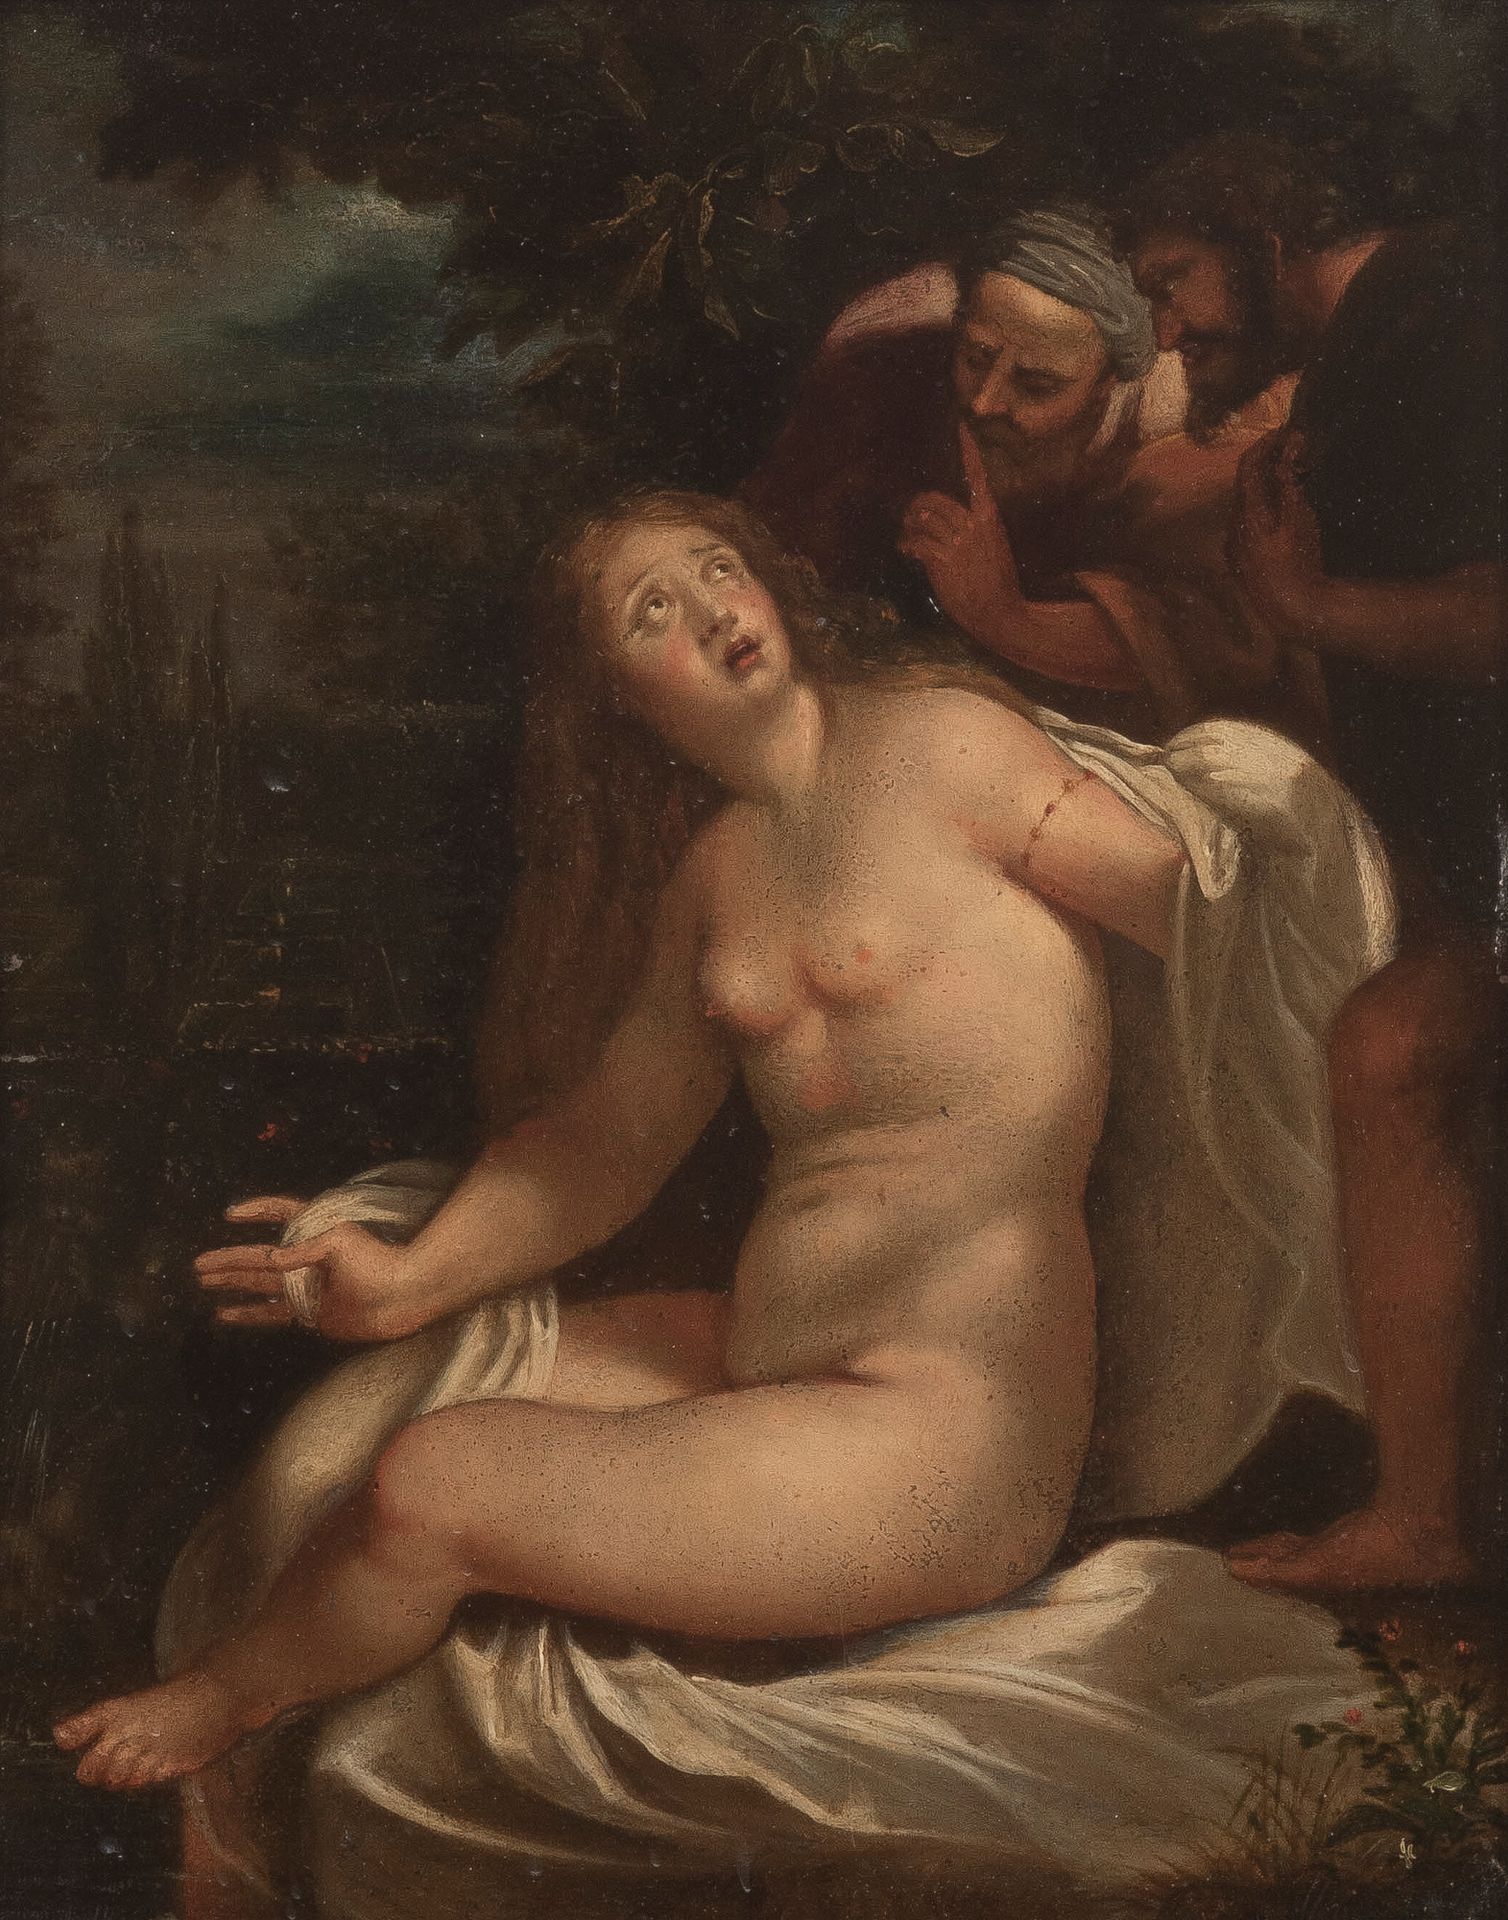 D'APRÈS RUBENS Susanna and the Elders
Oil on copper.
Reprise of the painting by &hellip;